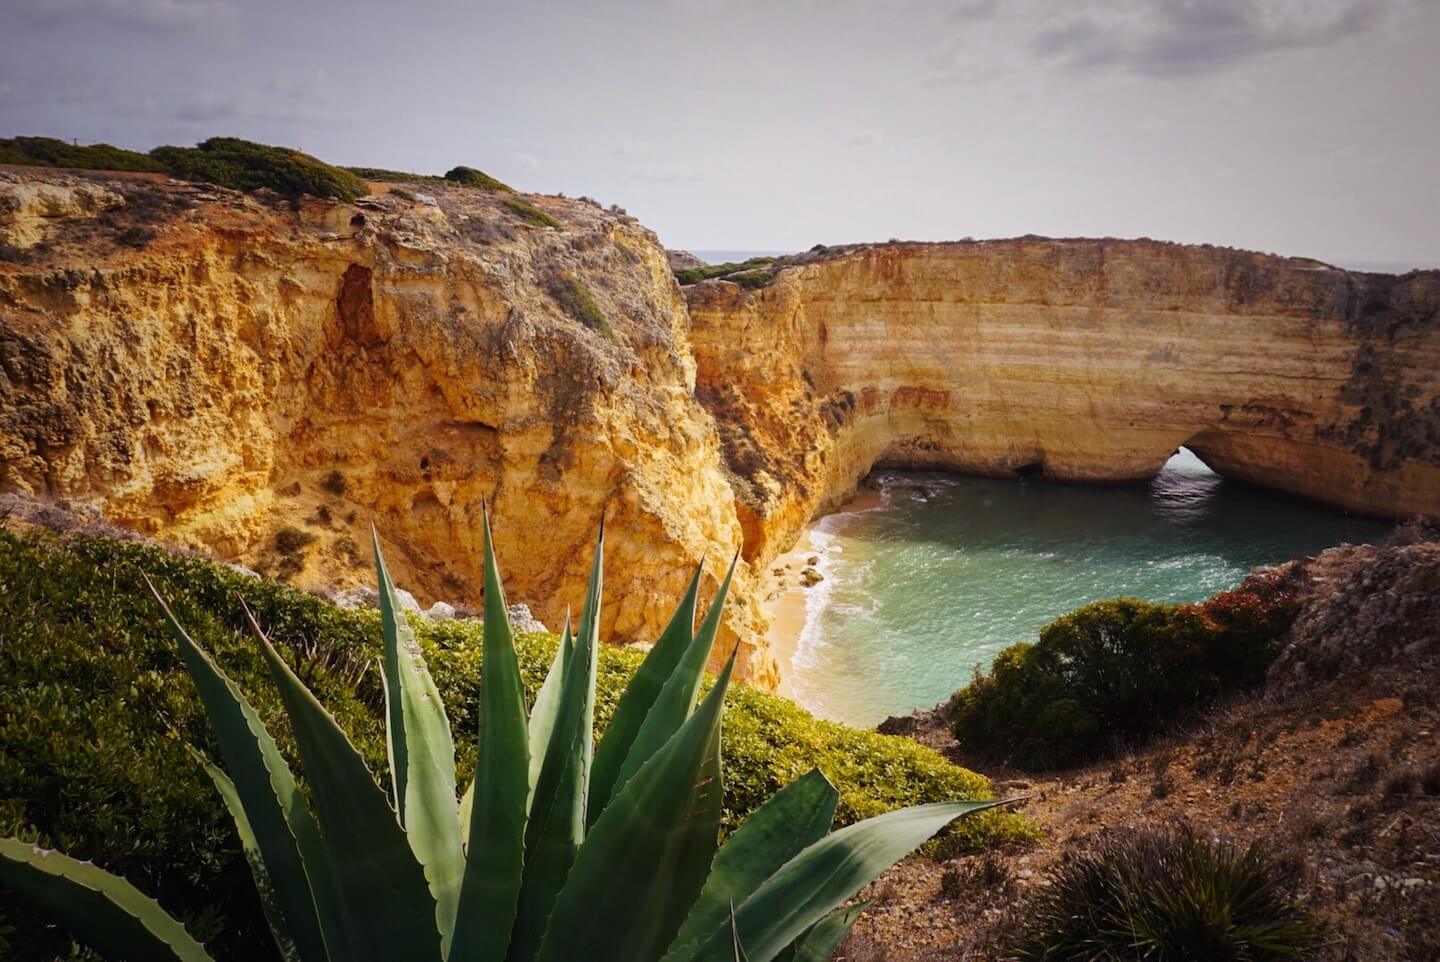 Trail of Headlands, Algarve - Best Hikes in Portugal